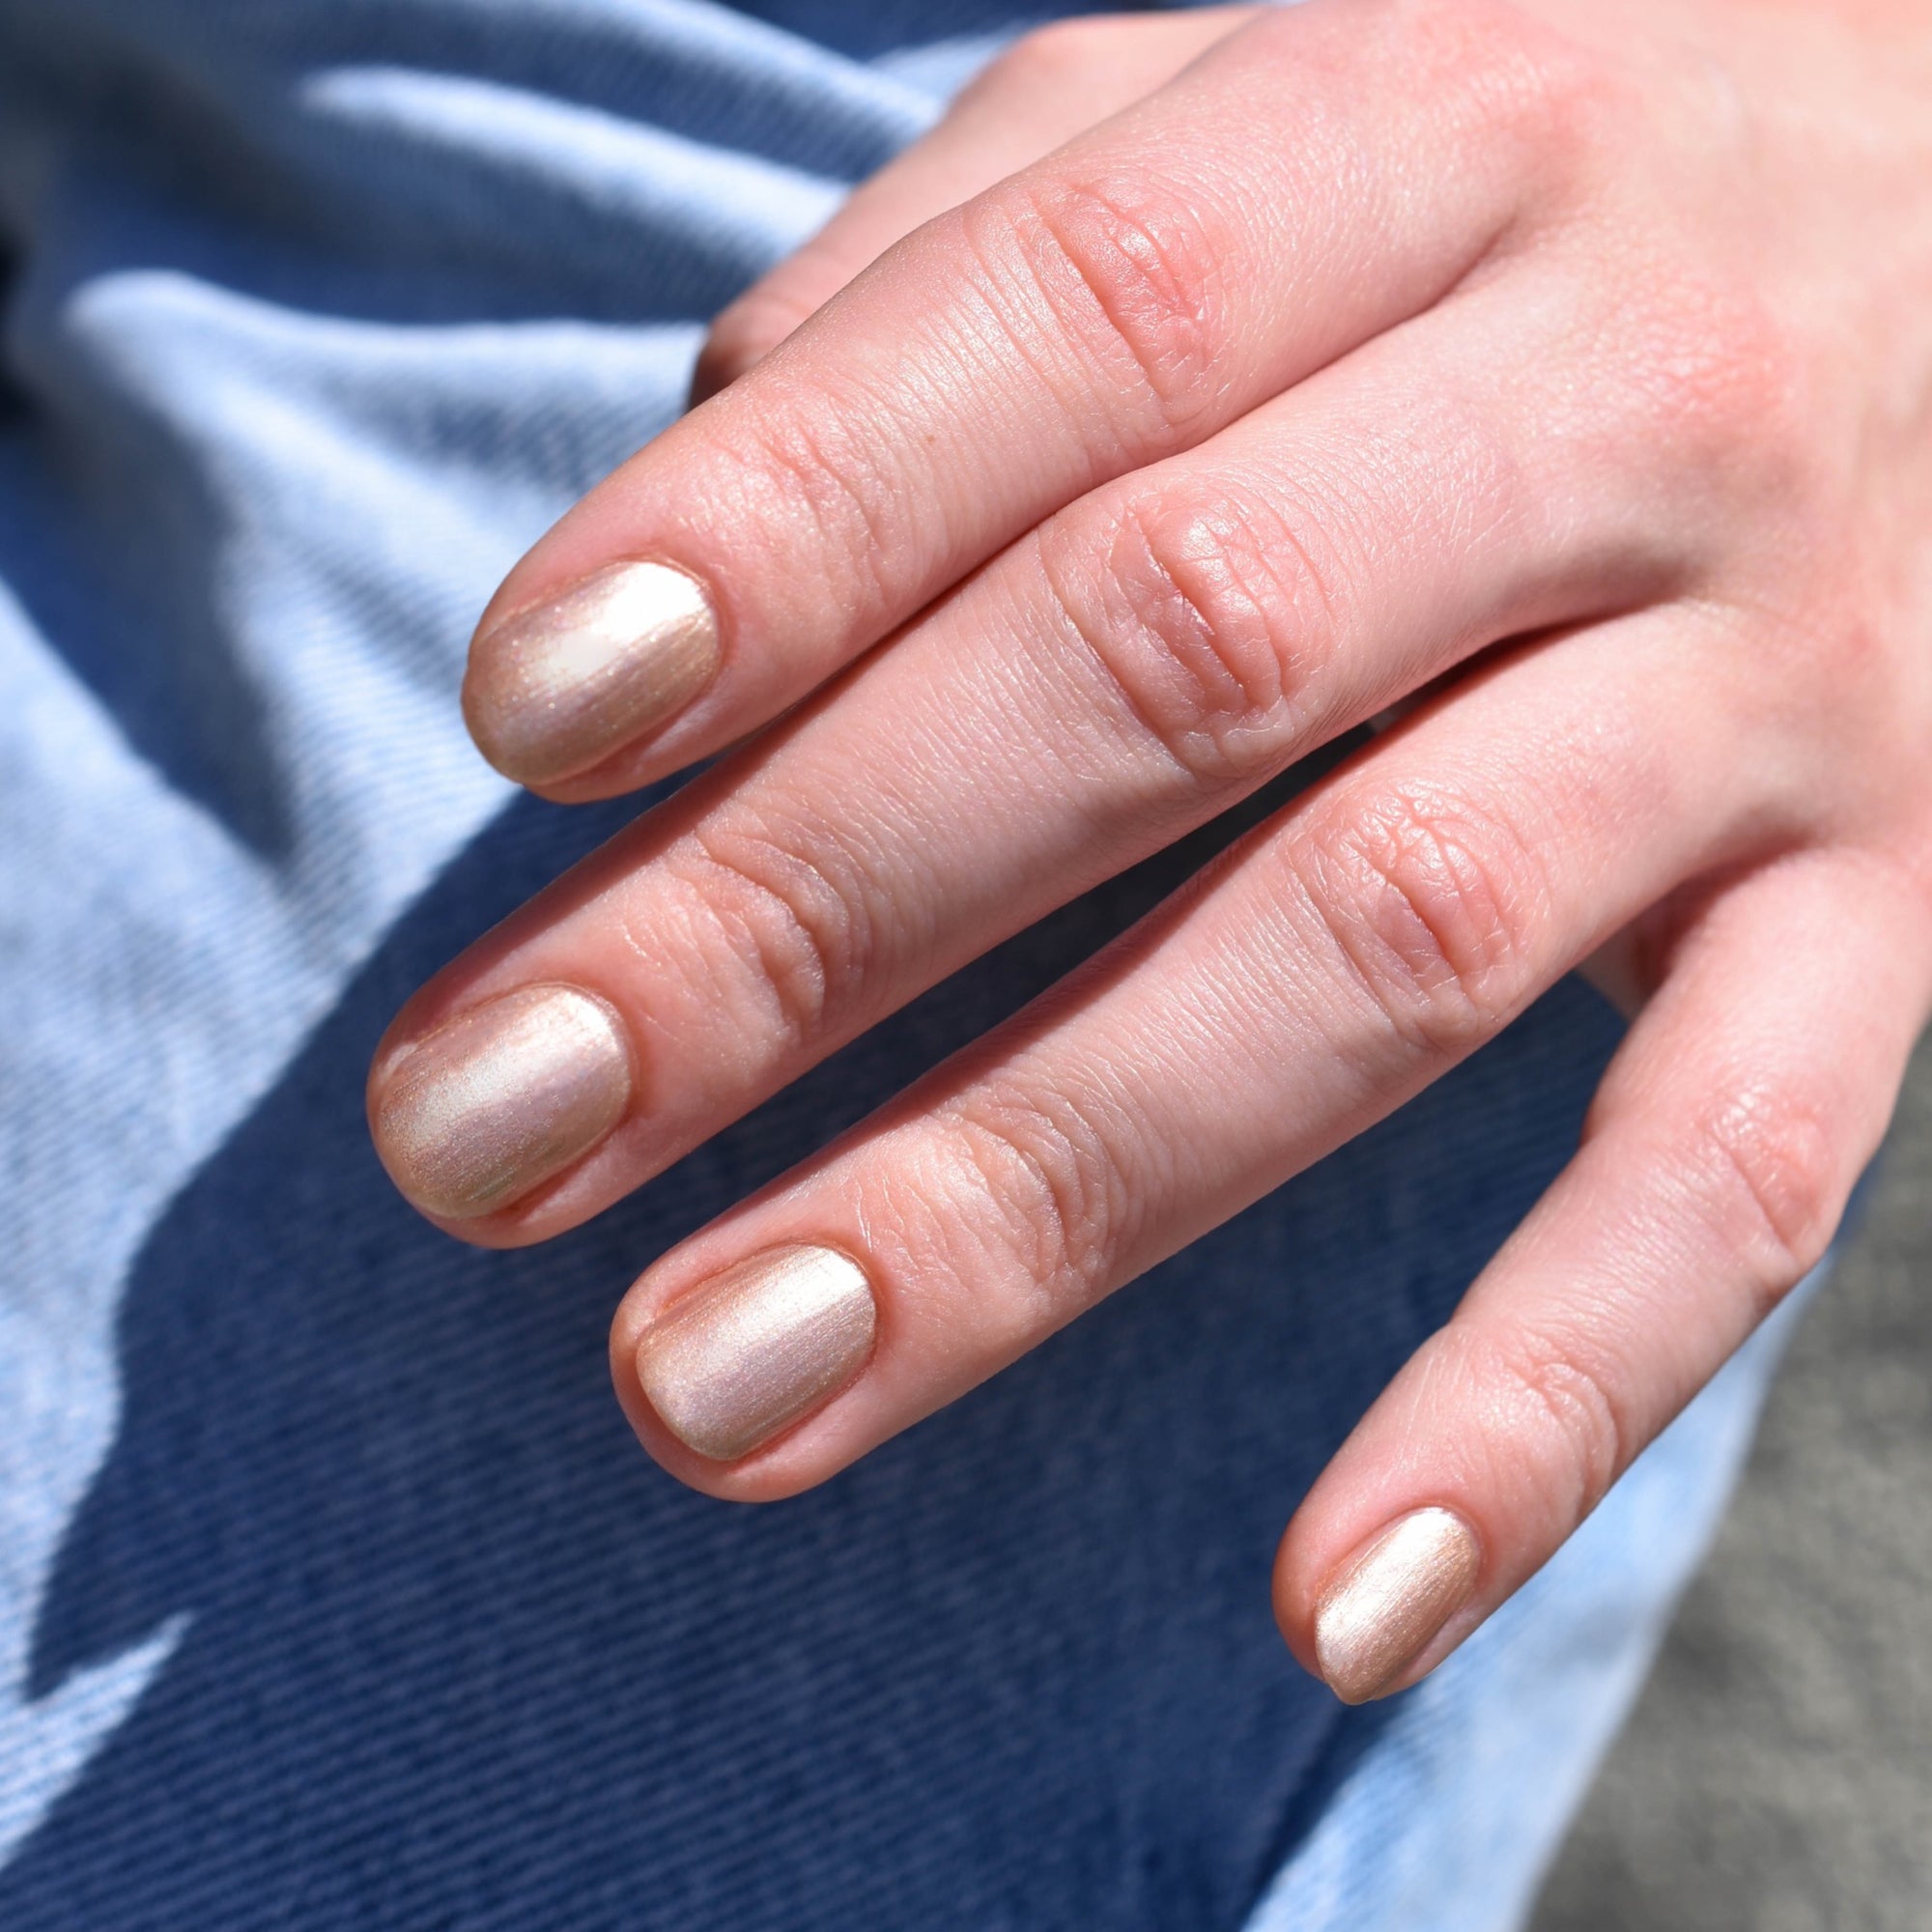 A close up of a light toned hand wearing Feathered nail polish from Hello Birdie which is a pale bronze color. The hand comes from the upper right hand corner and the background are light denim jeans.